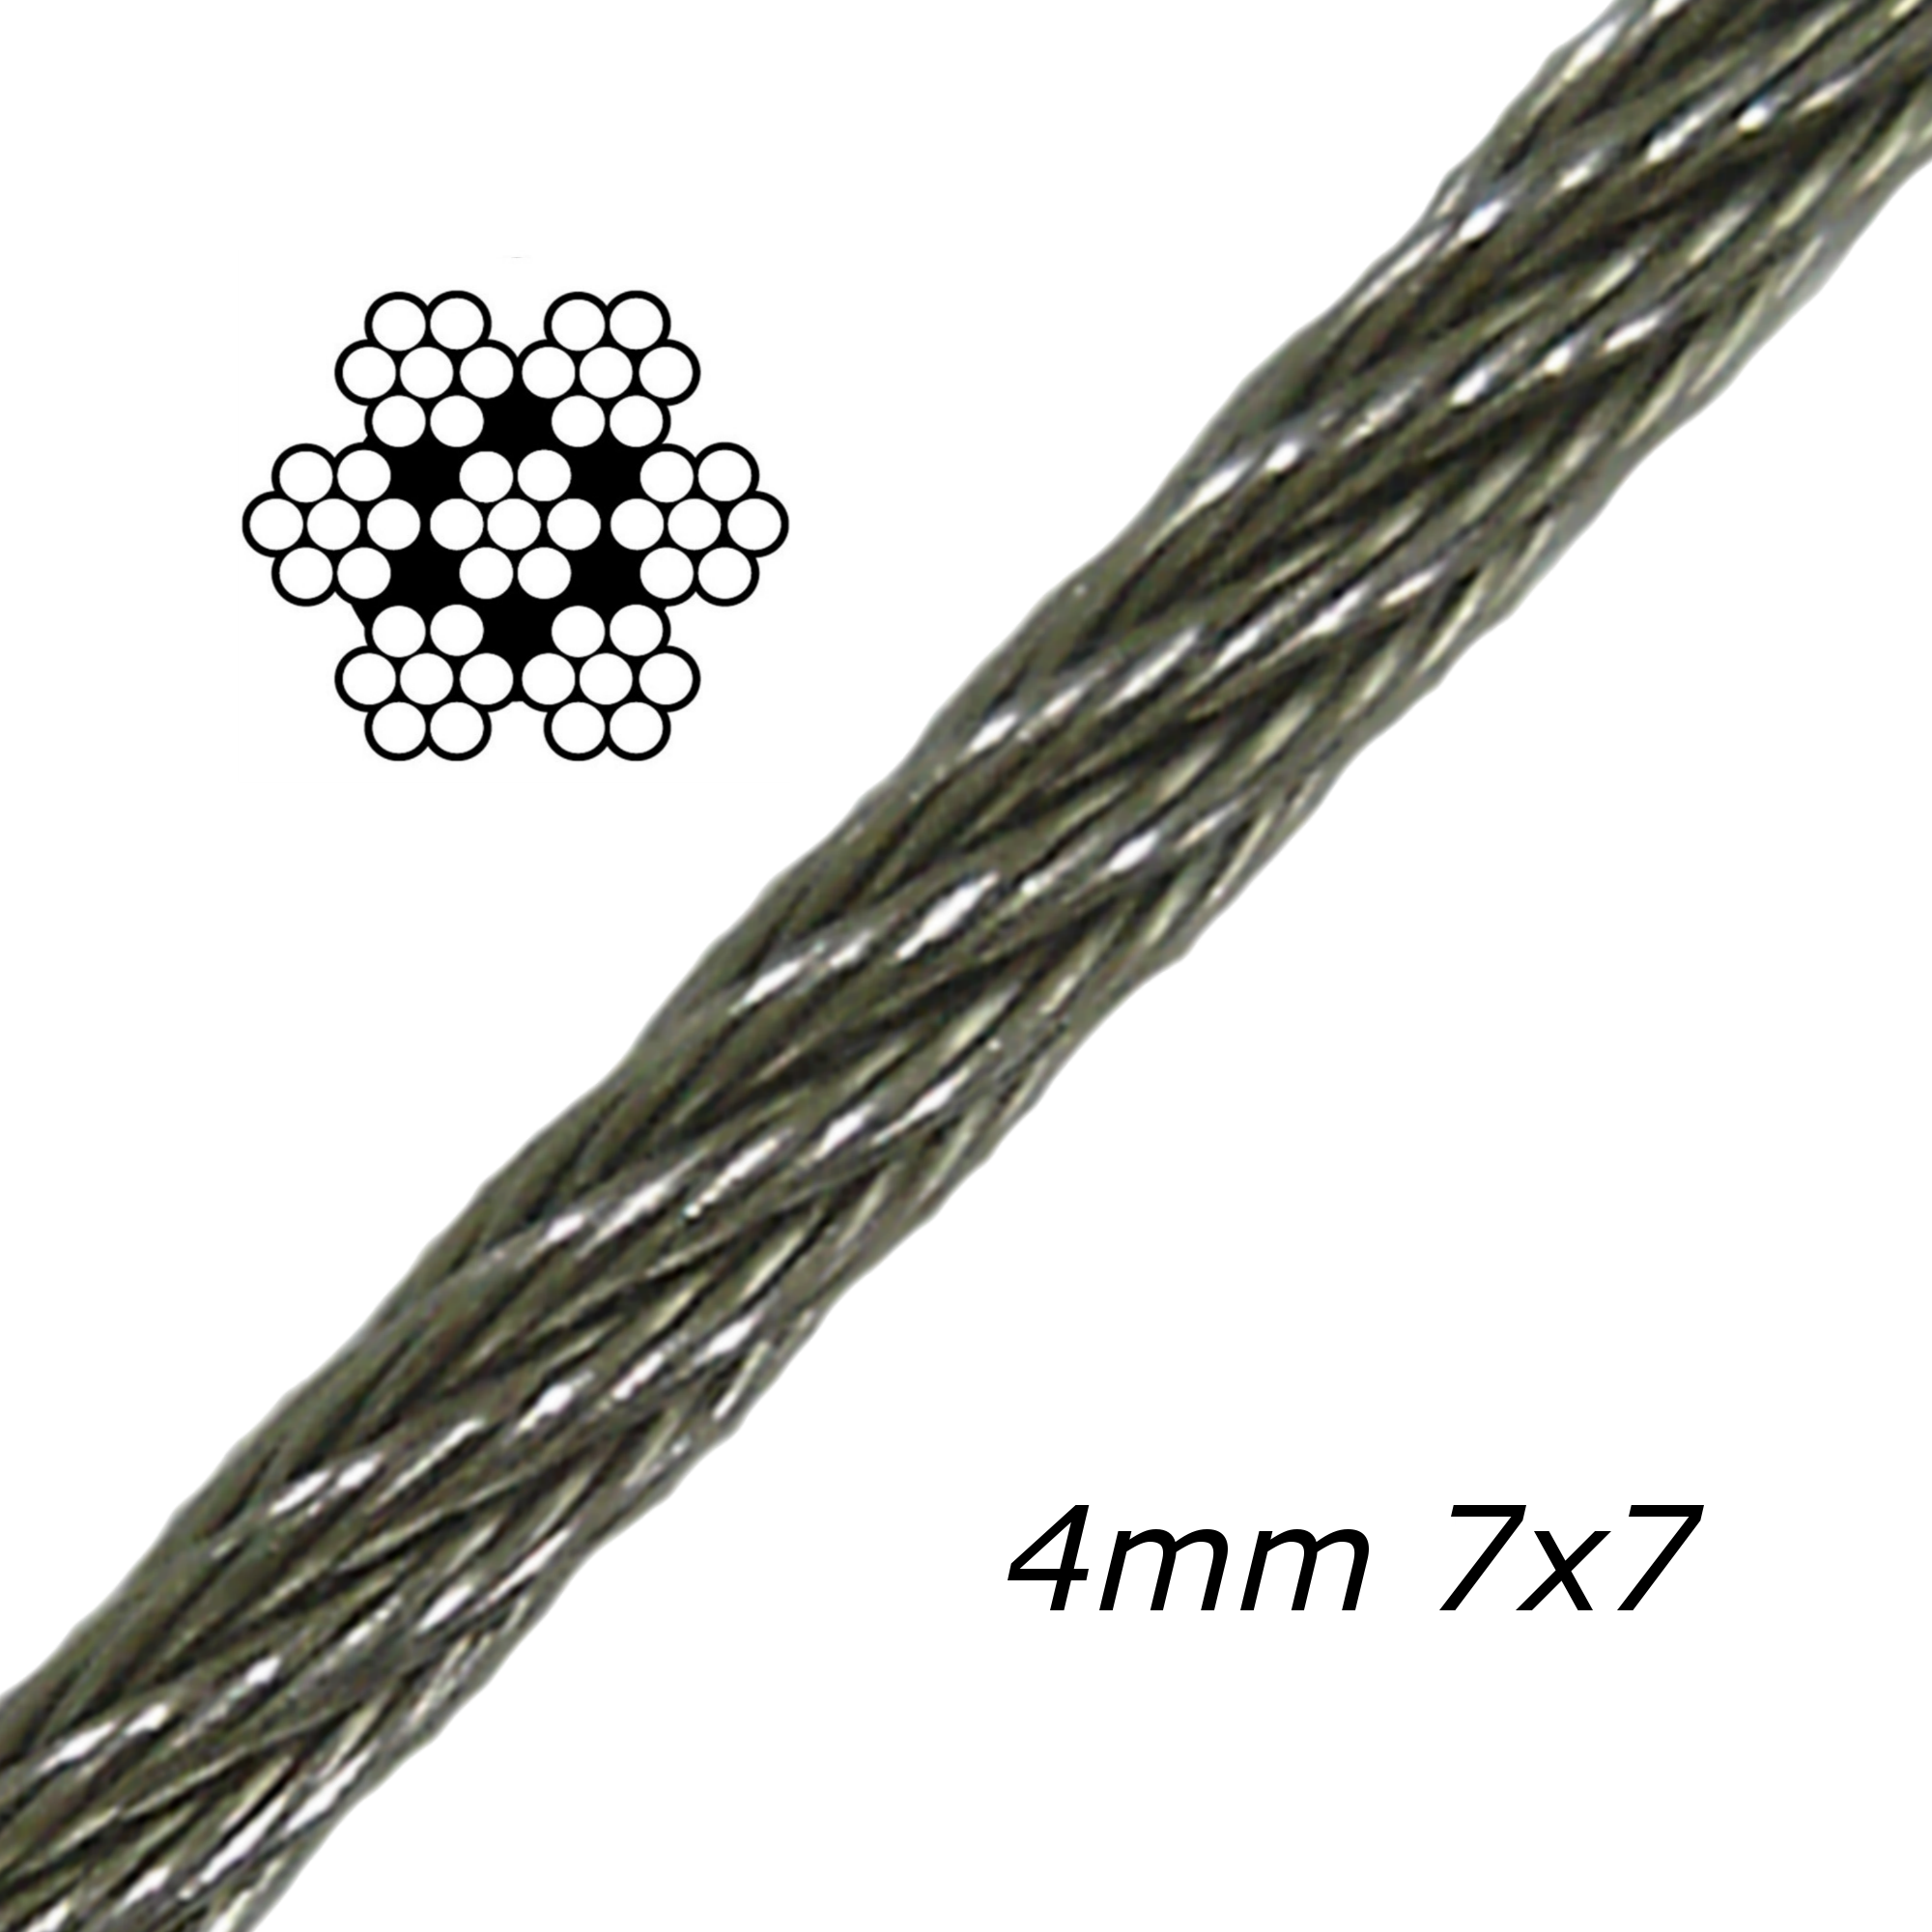 4mm Galvanised Steel Cable 7x7